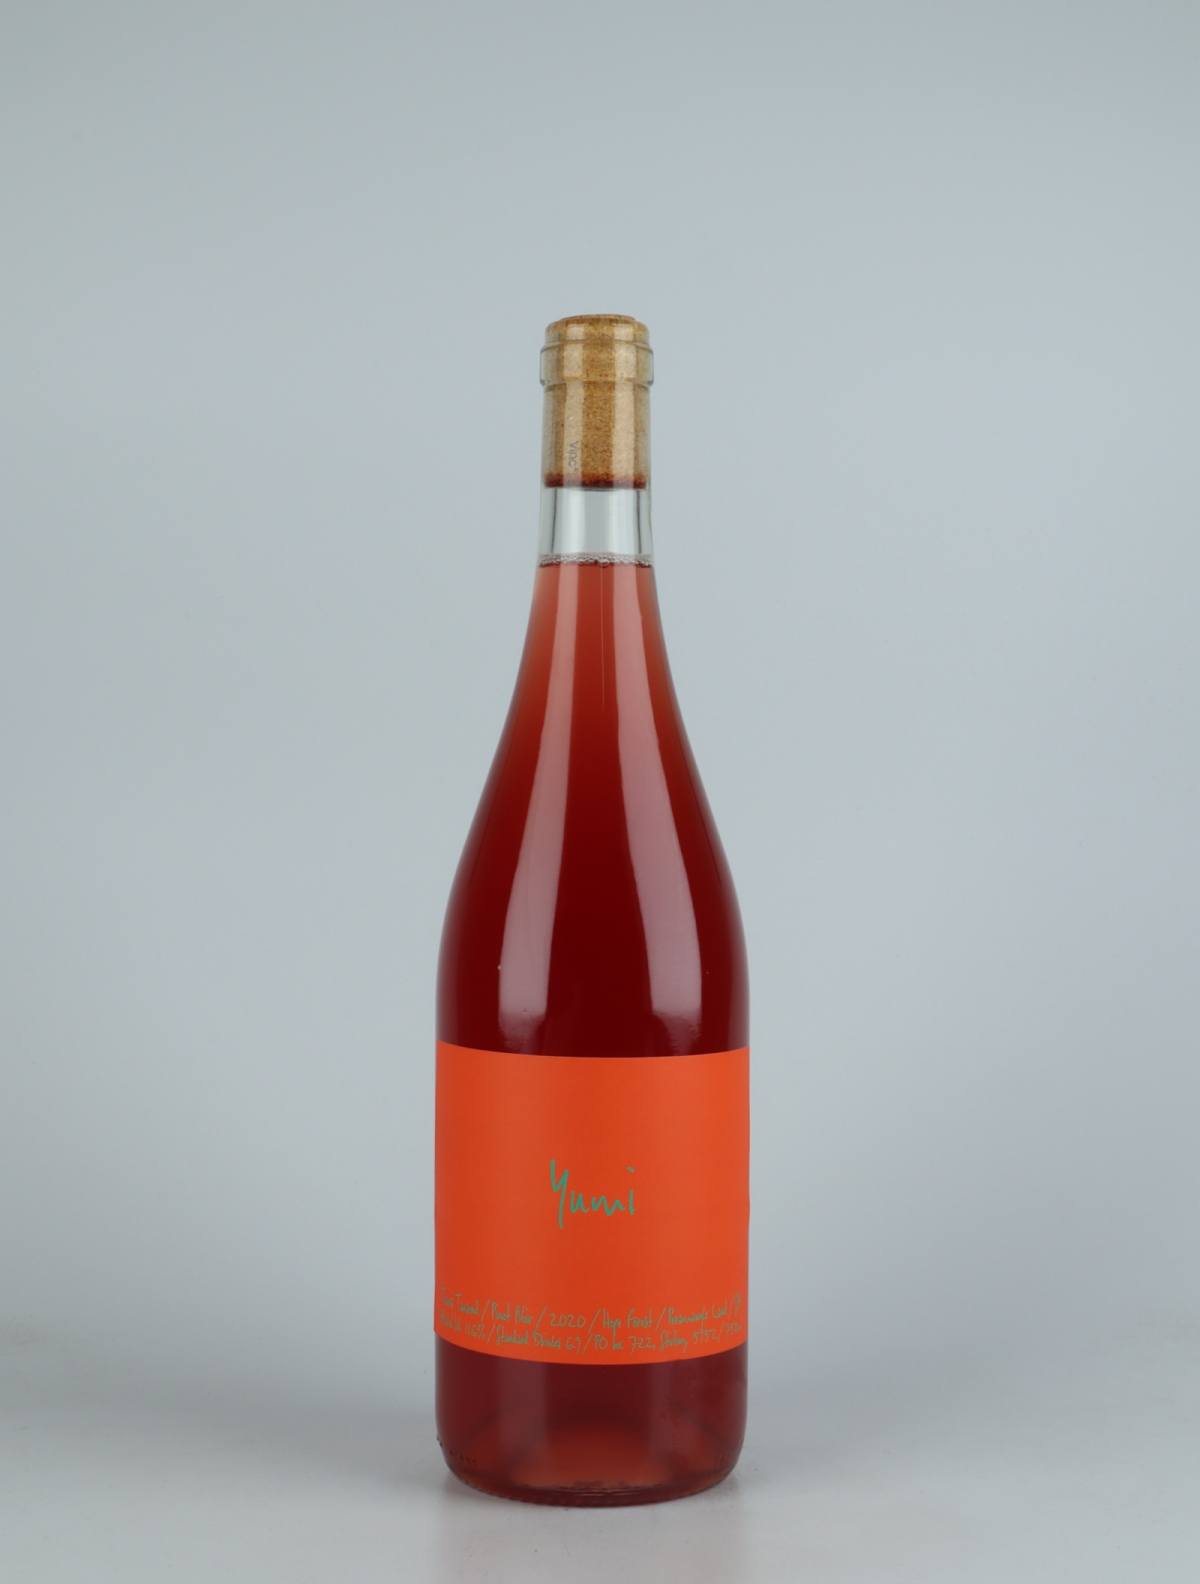 A bottle 2020 Yumi Pinot Noir Red wine from Travis Tausend, Adelaide Hills in Australia